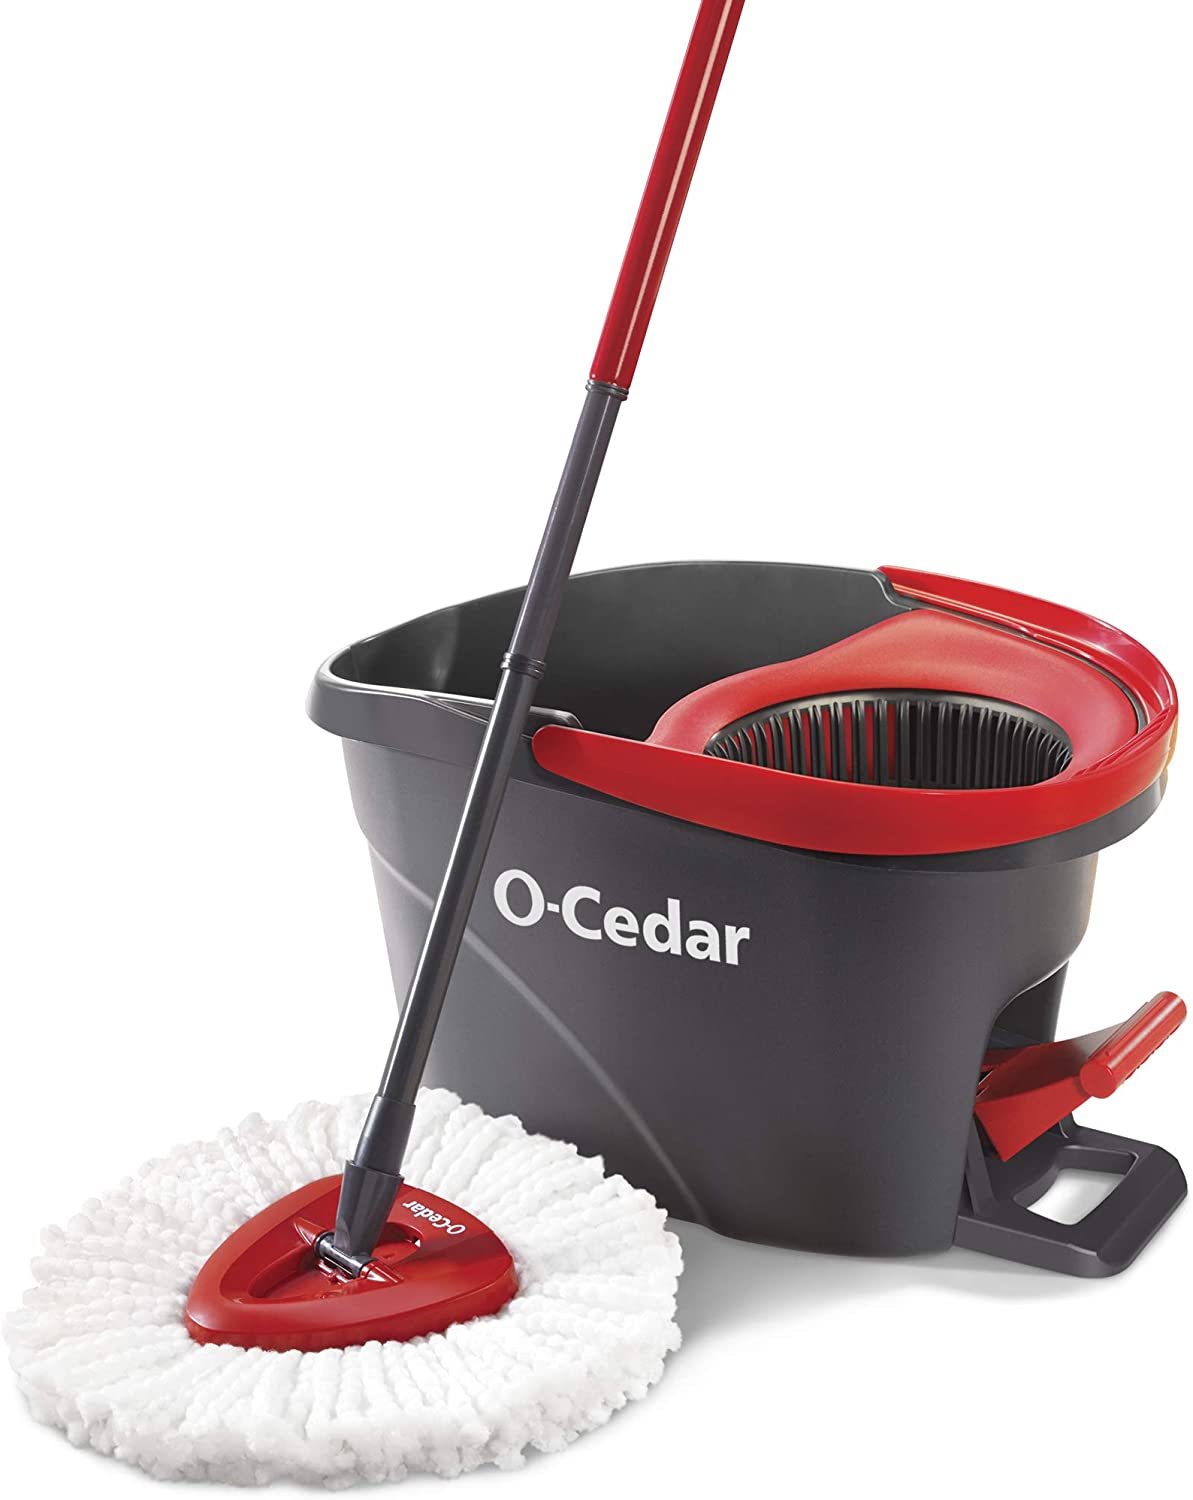 O-Cedar EasyWring Microfiber Spin Mop, Bucket Floor Cleaning System, Red, Gray 45